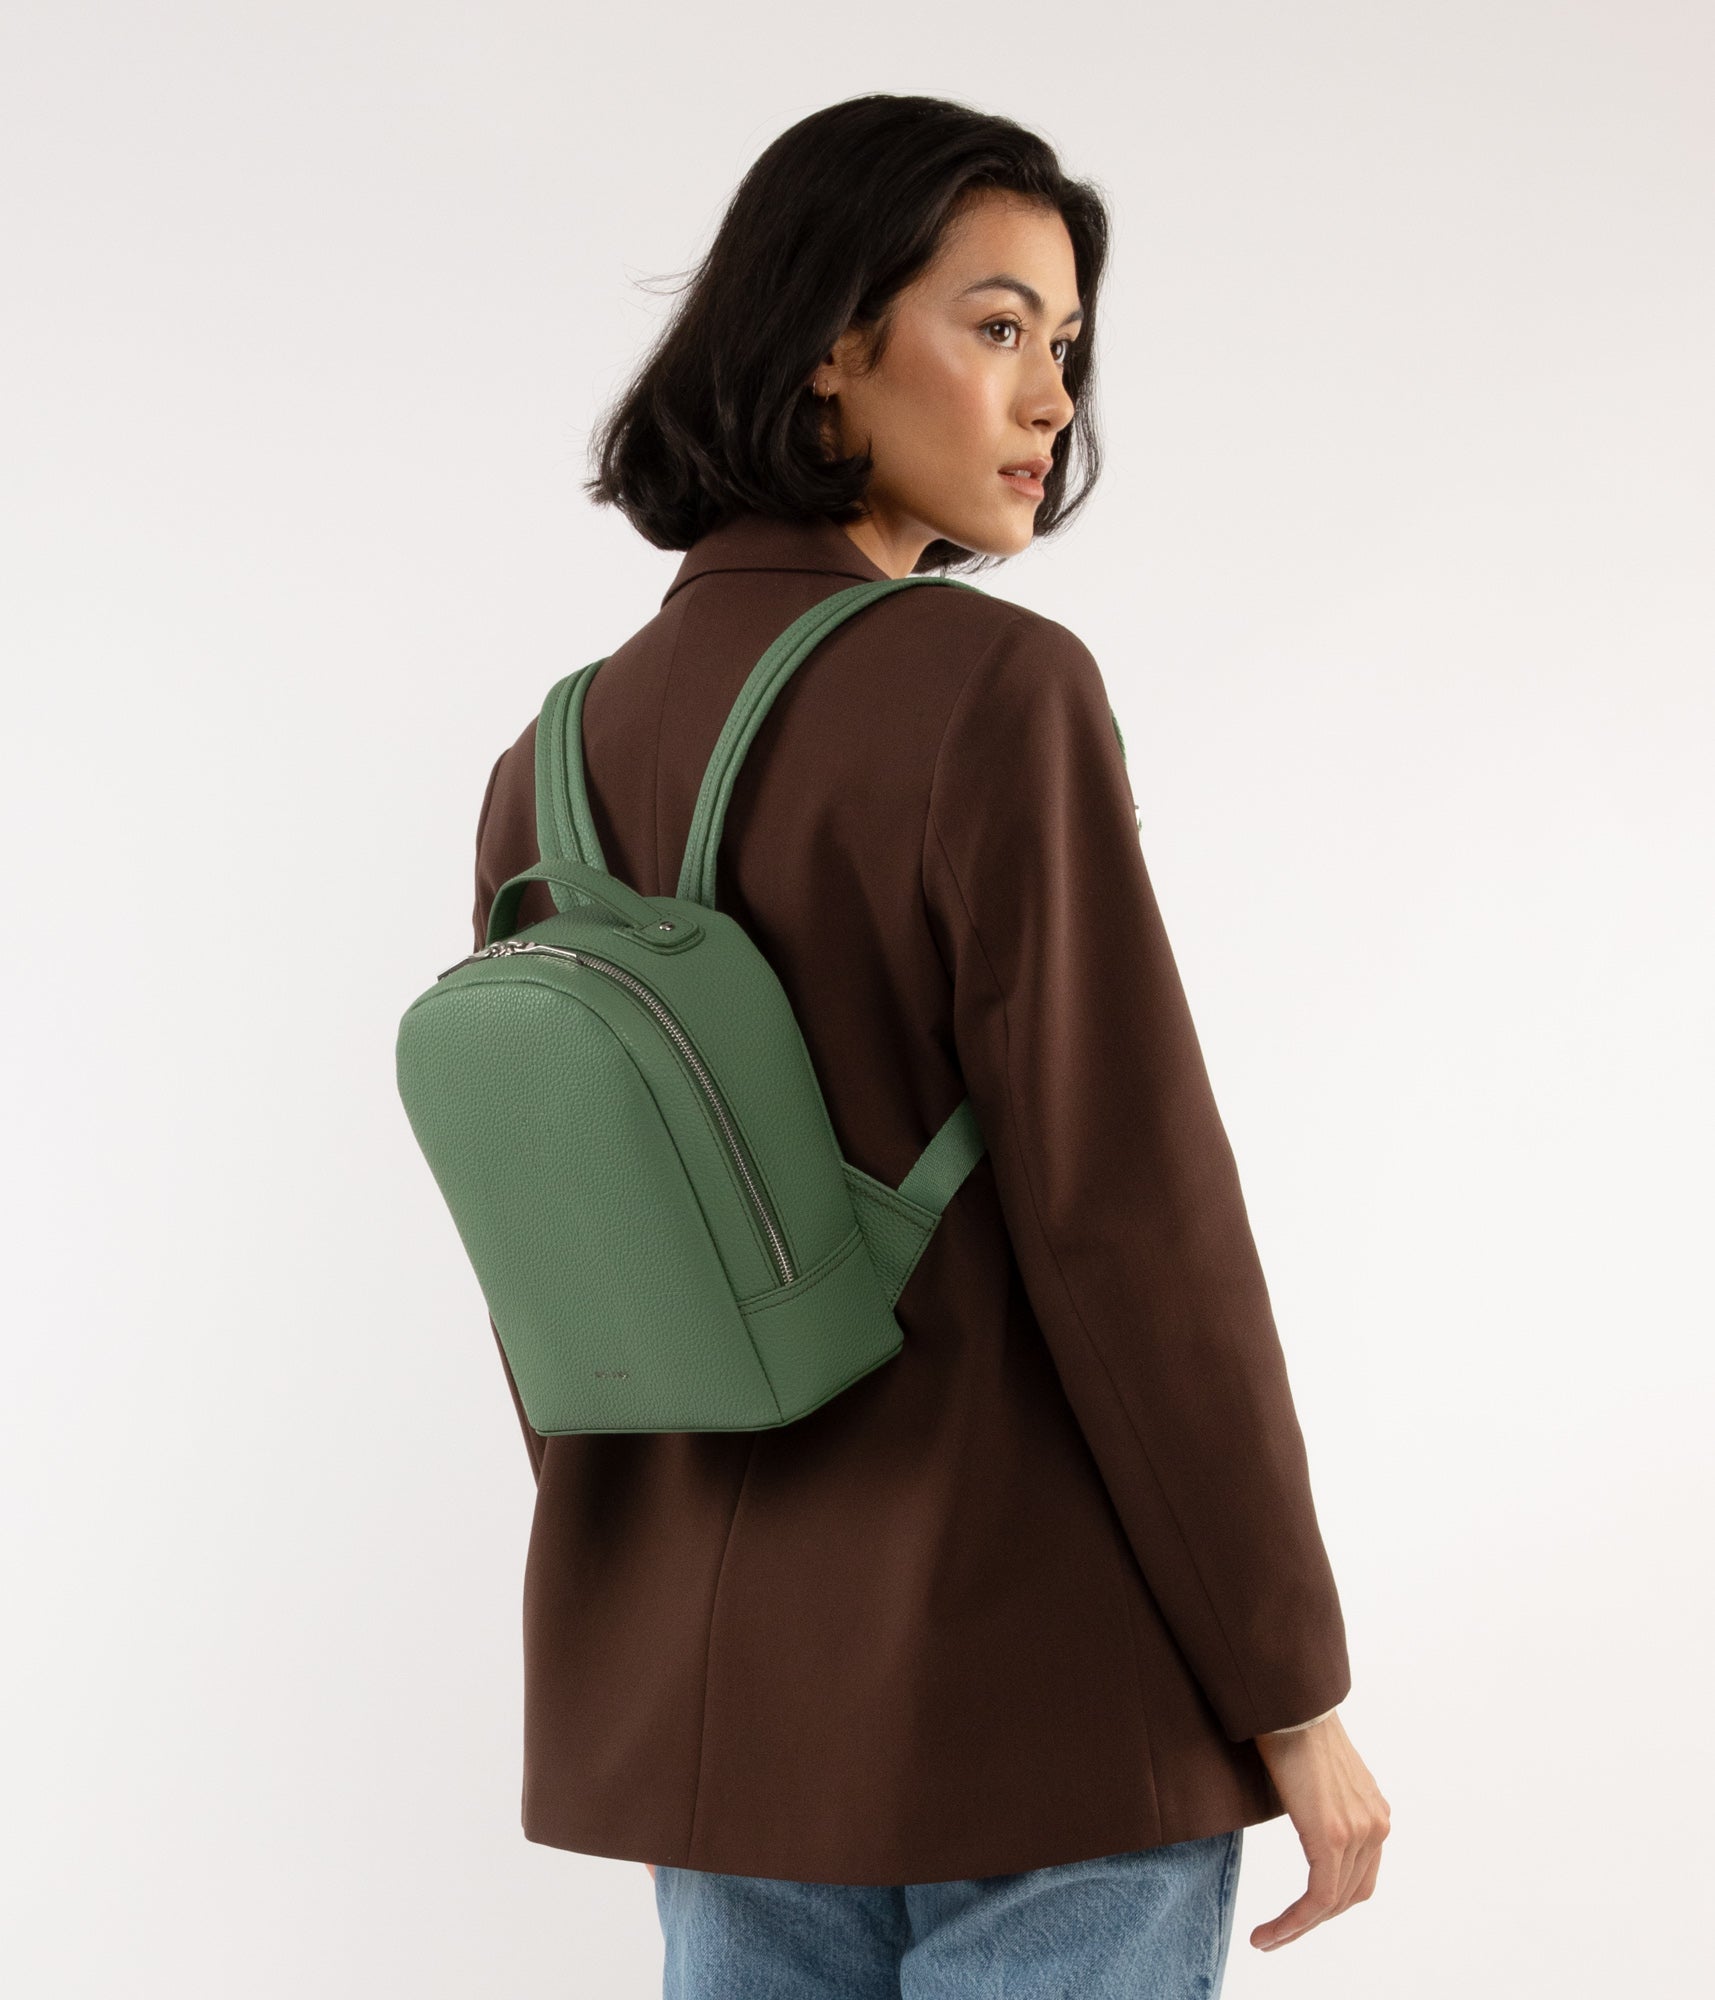 OLLY Vegan Backpack - Purity | Color: Brown - variant::chocolate